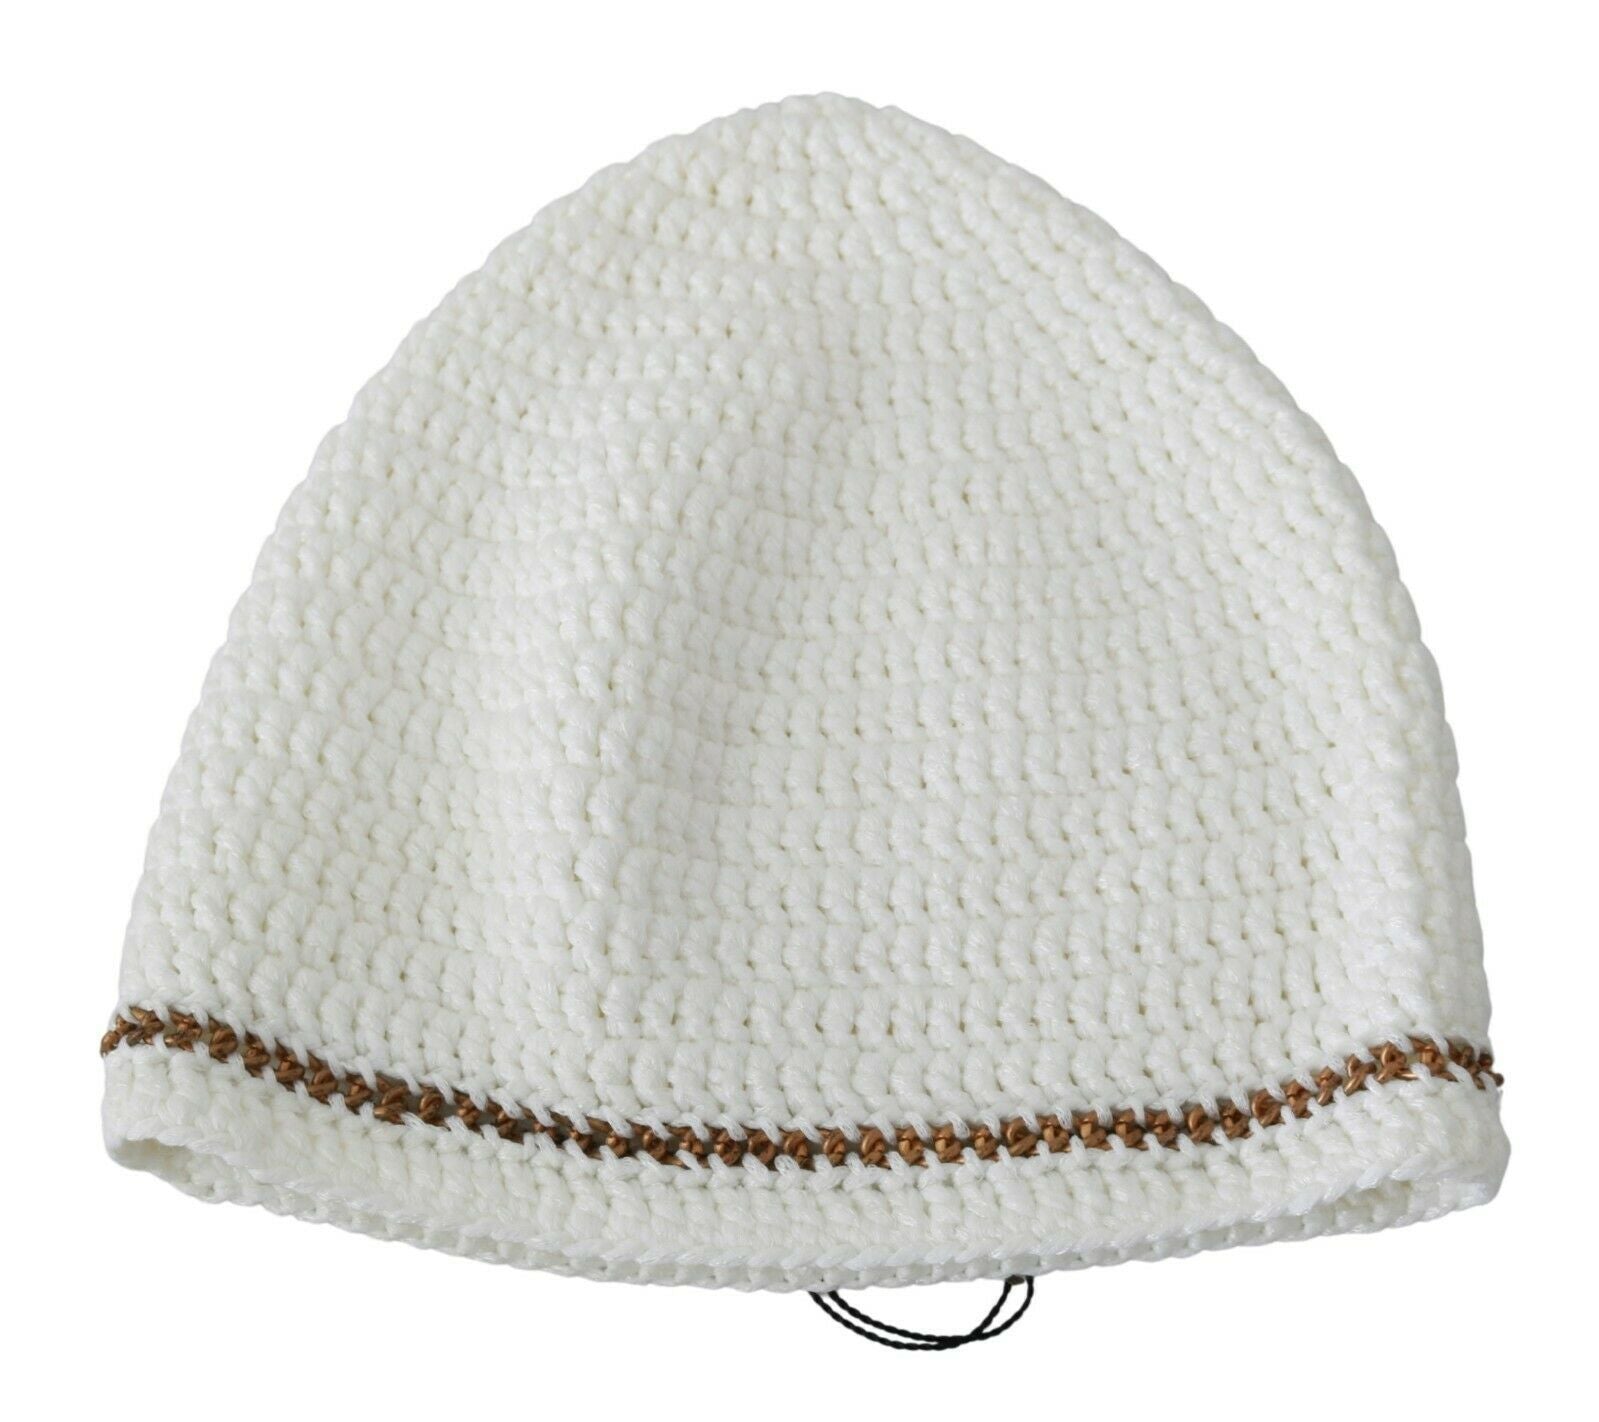 Ermanno Scervino Chic White Beanie with Metal Chain Detail